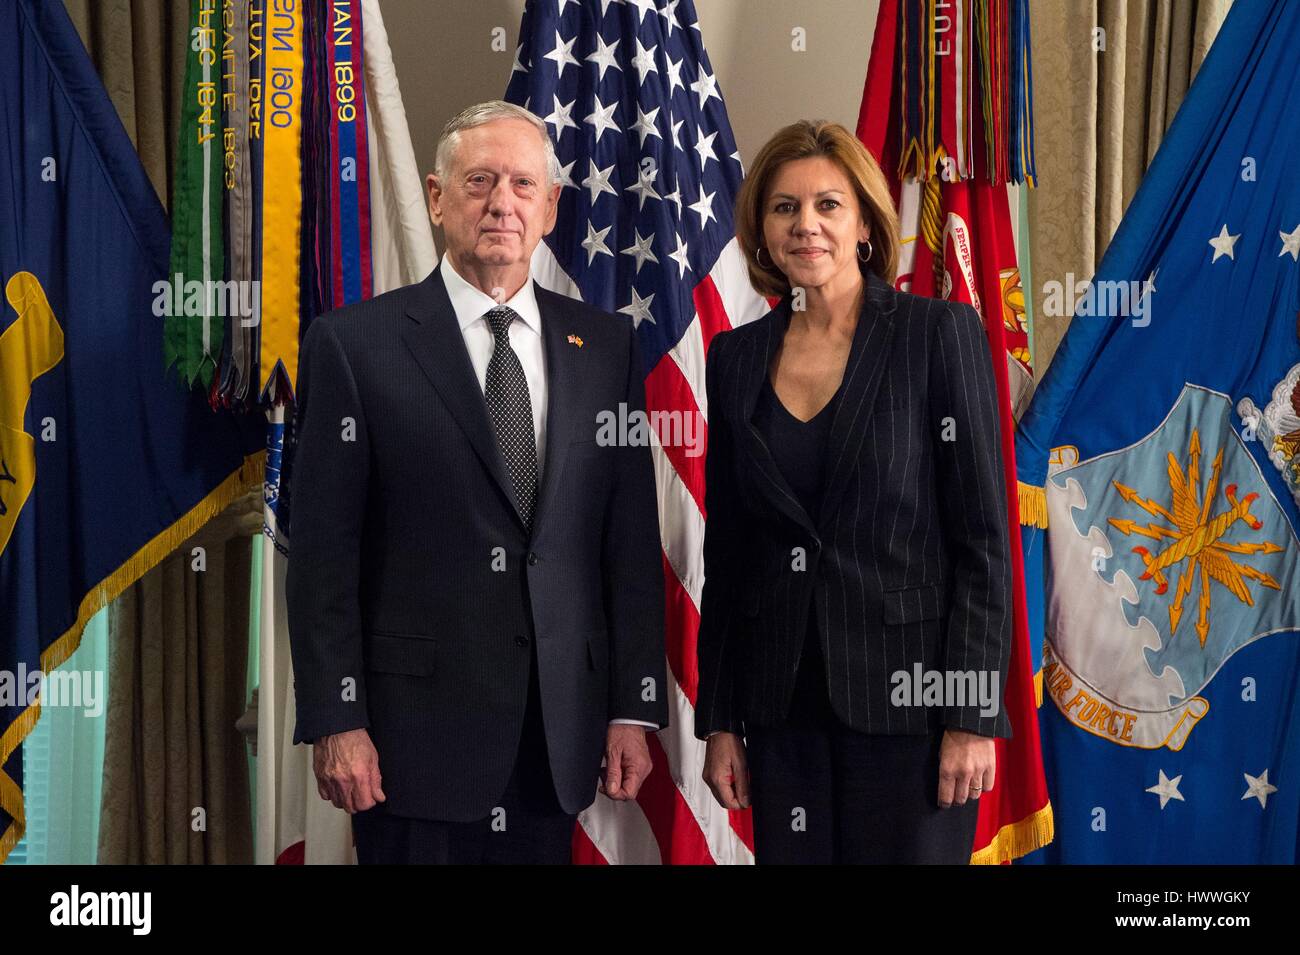 Arlington, Virginia, USA. 23rd March 2017. U.S. Secretary of Defense Jim Mattis stands with Spanish Defense Minister Maria Dolores de Cospedal prior to their bilateral meeting at the Pentagon March 23, 2017 in Arlington, Virginia. Credit: Planetpix/Alamy Live News Stock Photo